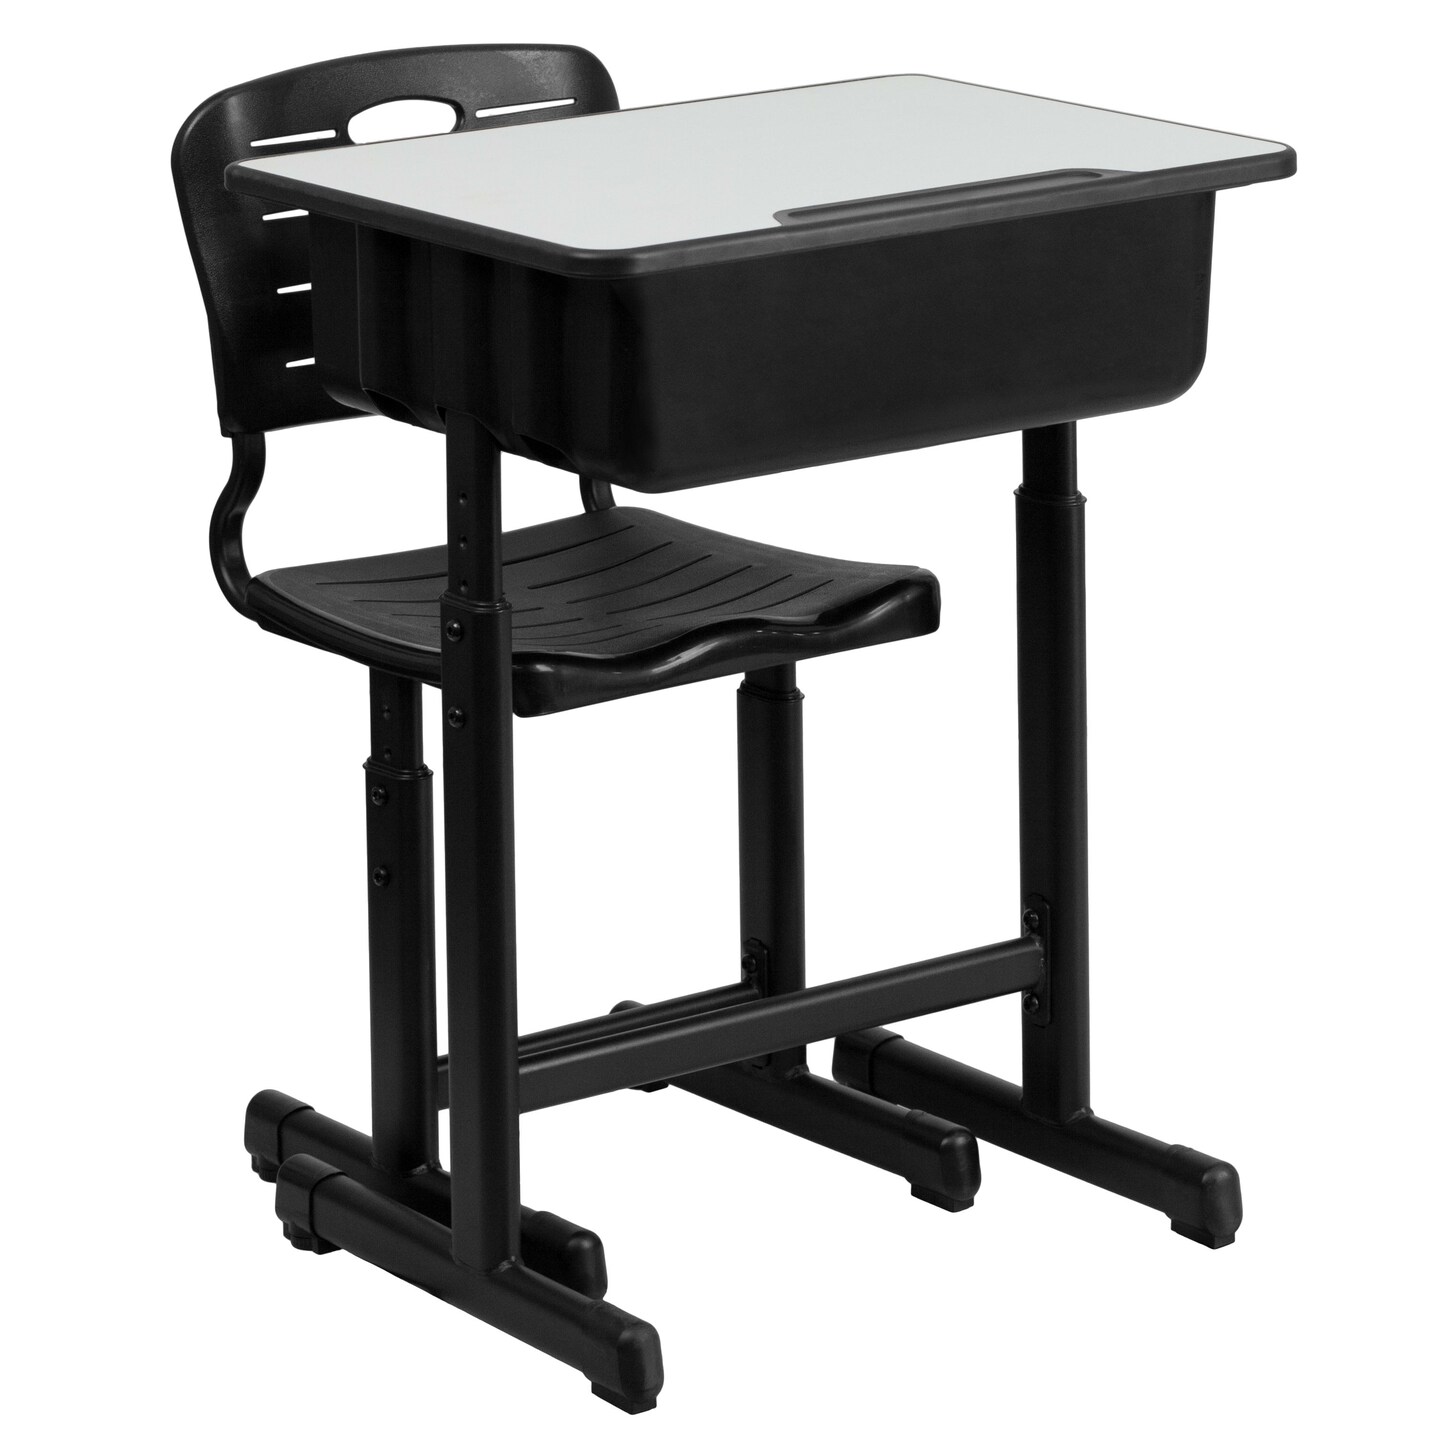 Emma and Oliver Adjustable Height Student Desk and Chair with Pedestal Frame